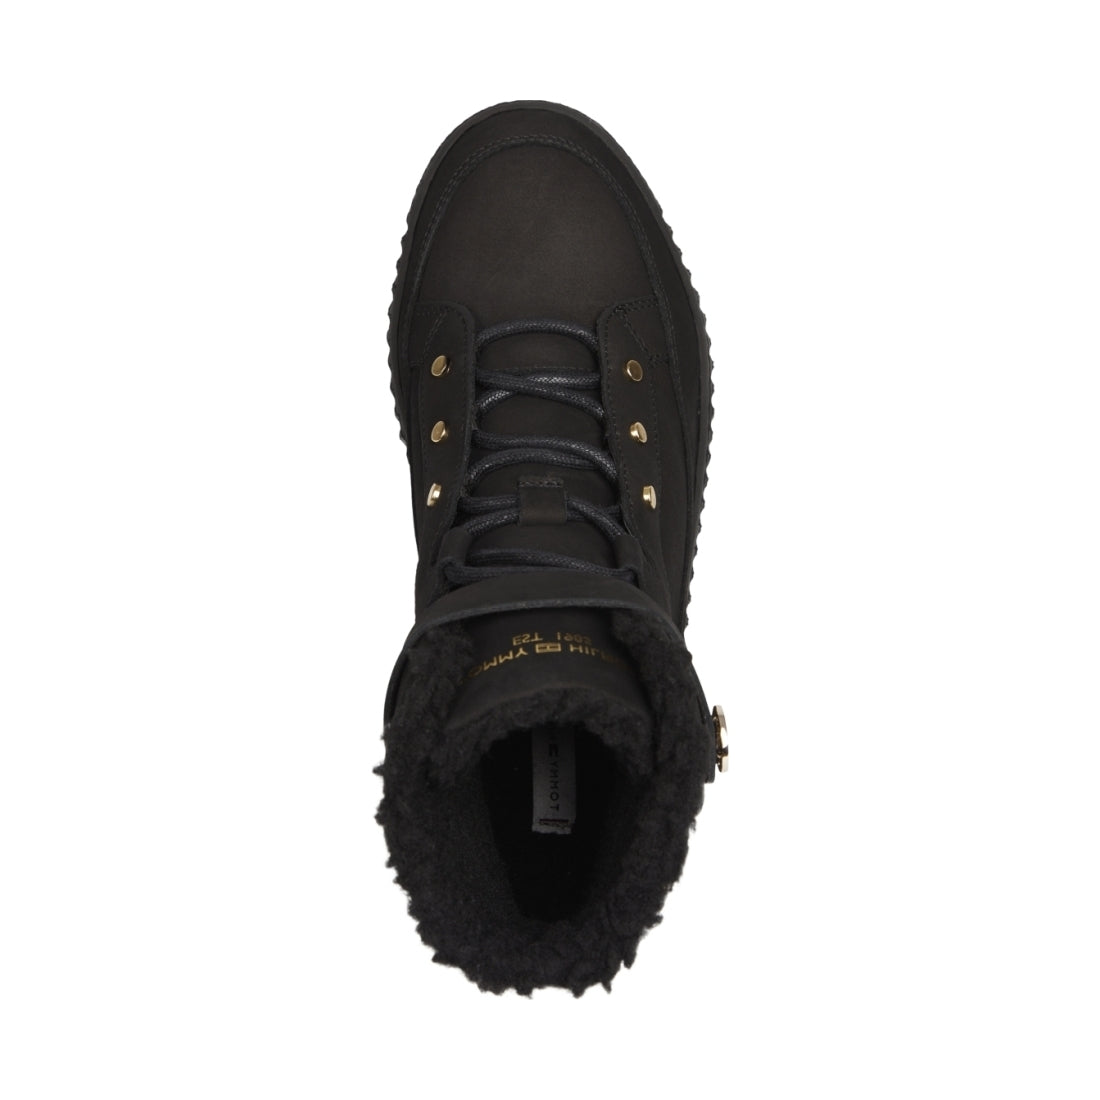 Tommy Hilfiger womens Black warmlined lace up boot | Vilbury London